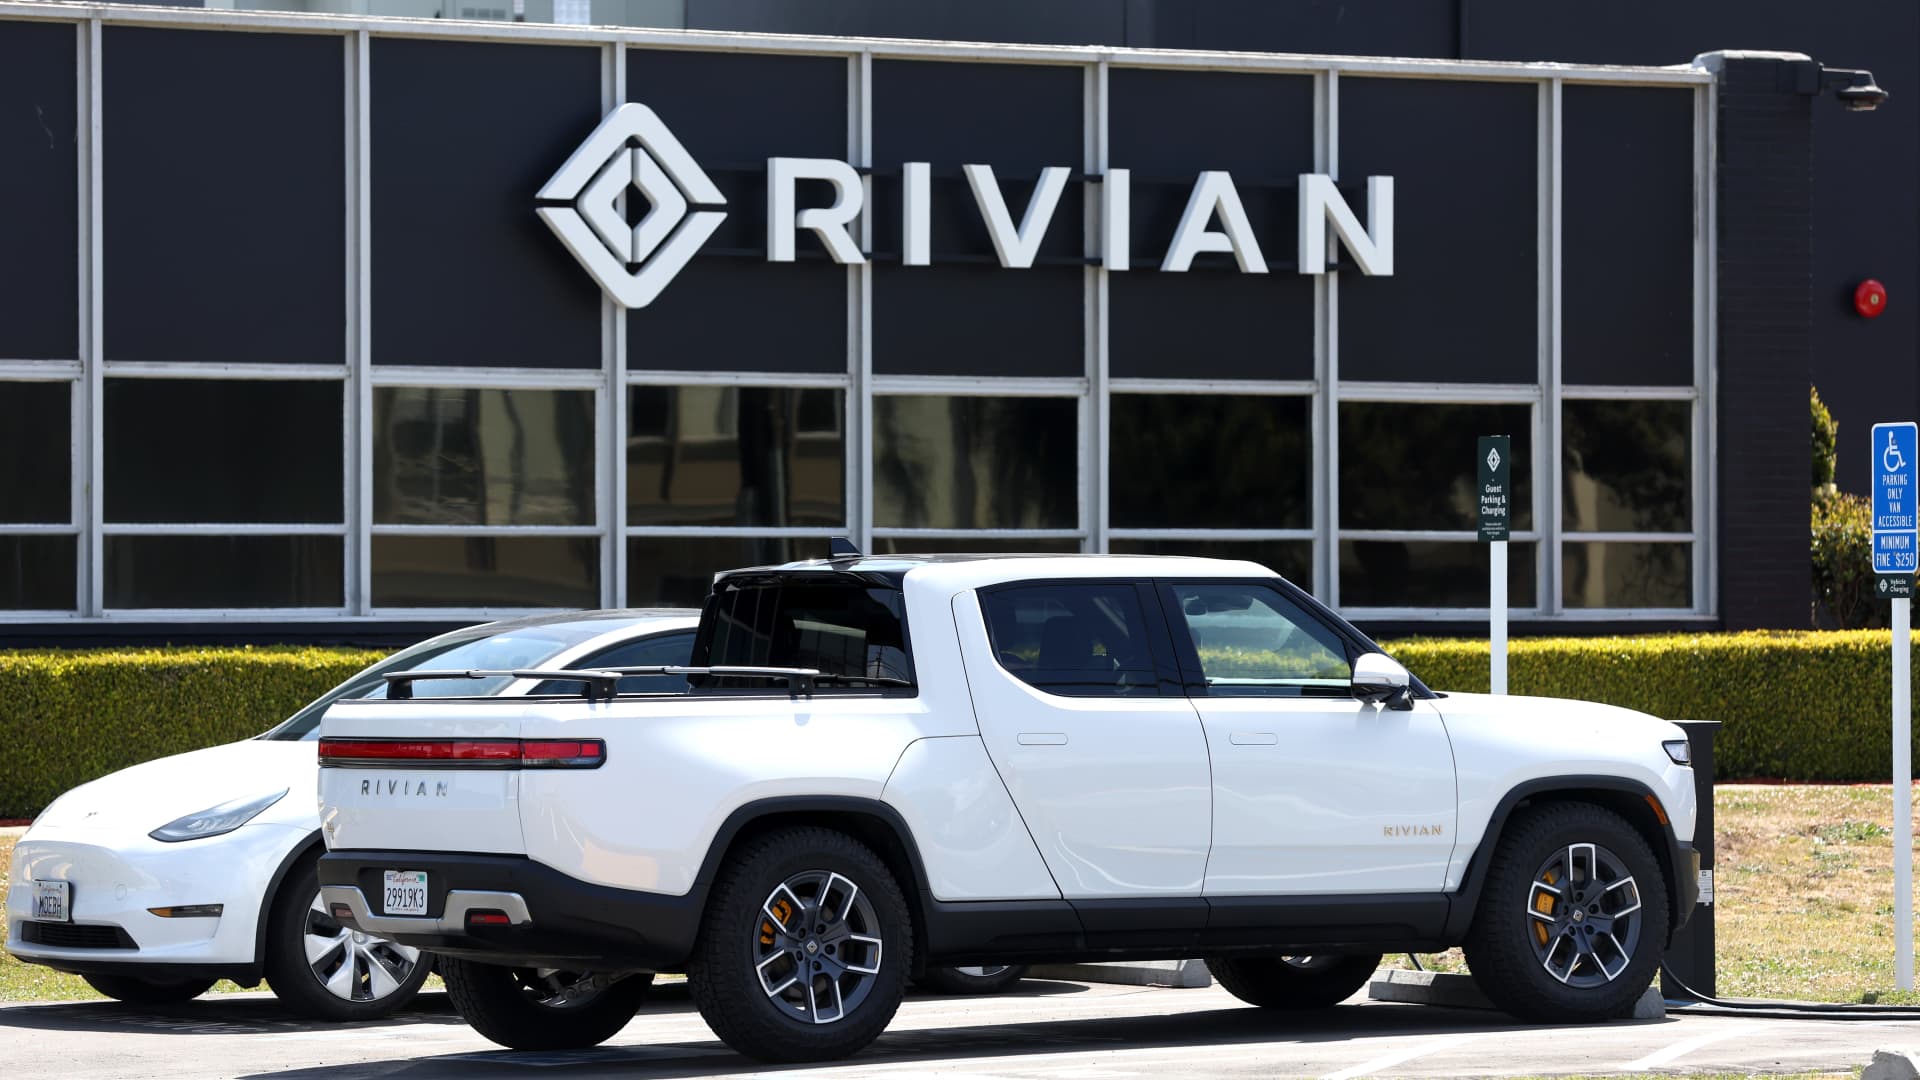 Stocks making the biggest moves midday: Rivian, Delta, Snap, Dish Network and more